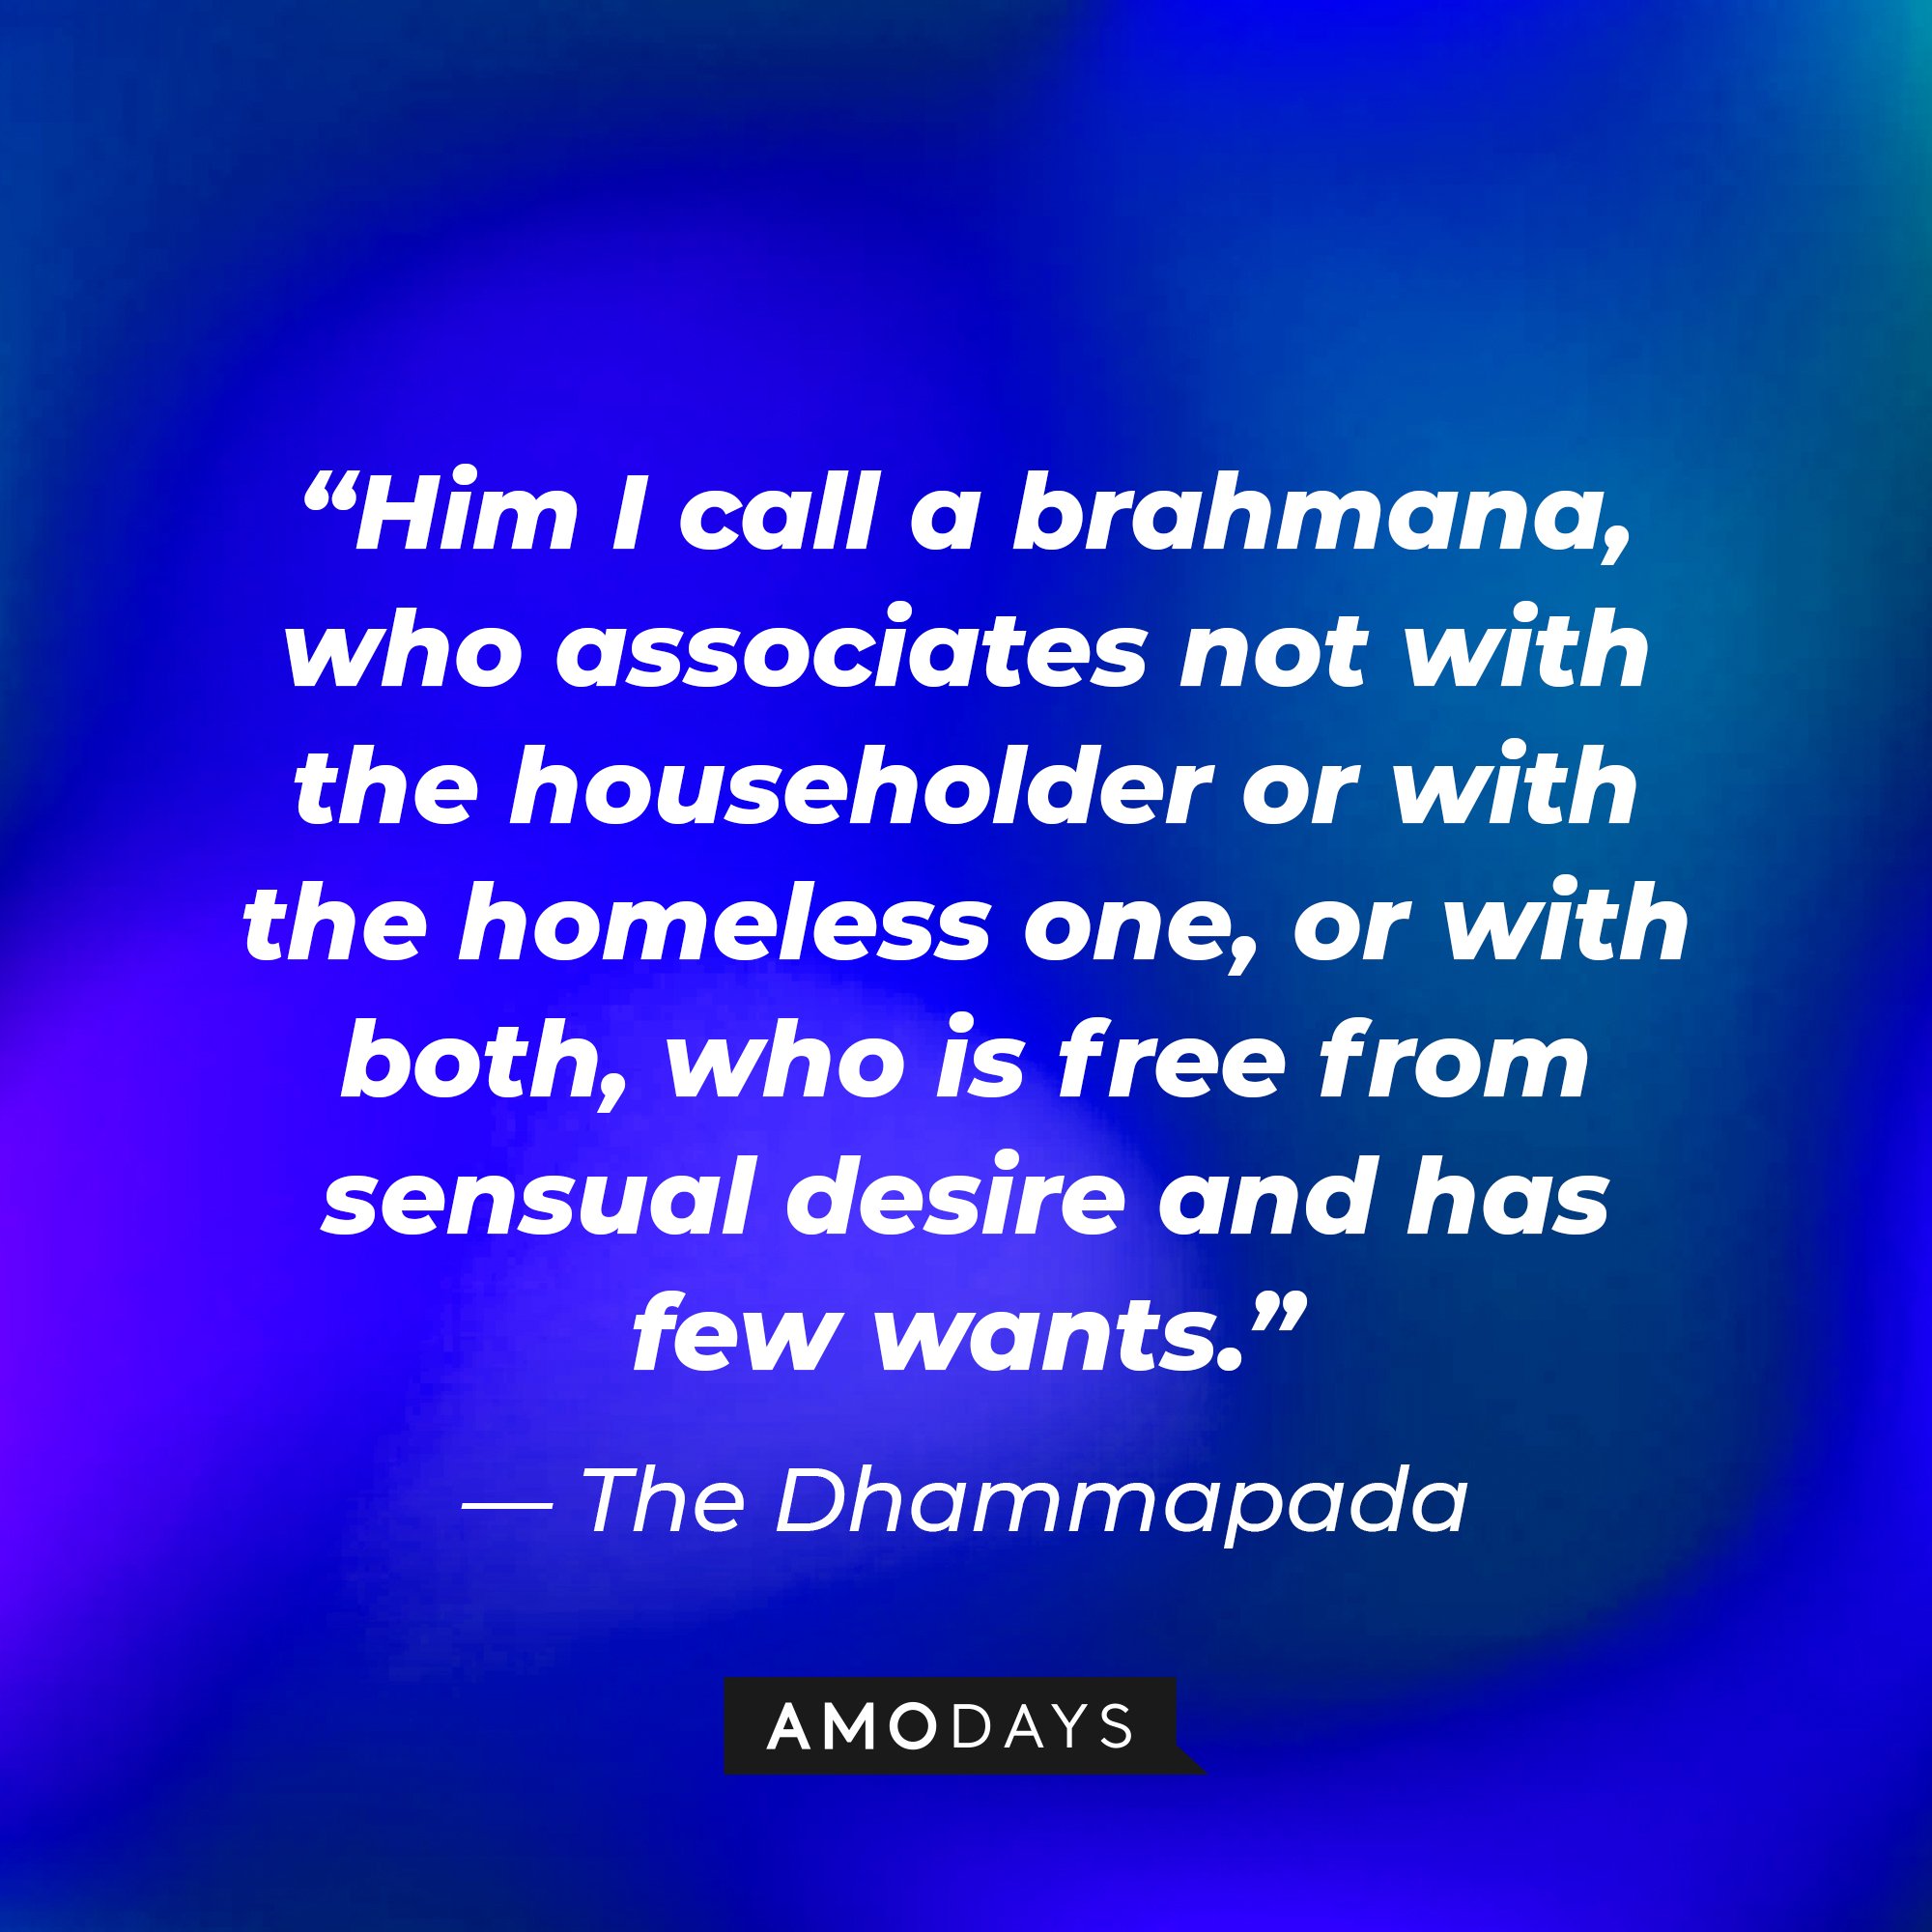 The Dhammapada's quote: “Him I call a brahmana, who associates not with the householder or with the homeless one, or with both, who is free from sensual desire and has few wants.” | Image: AmoDays